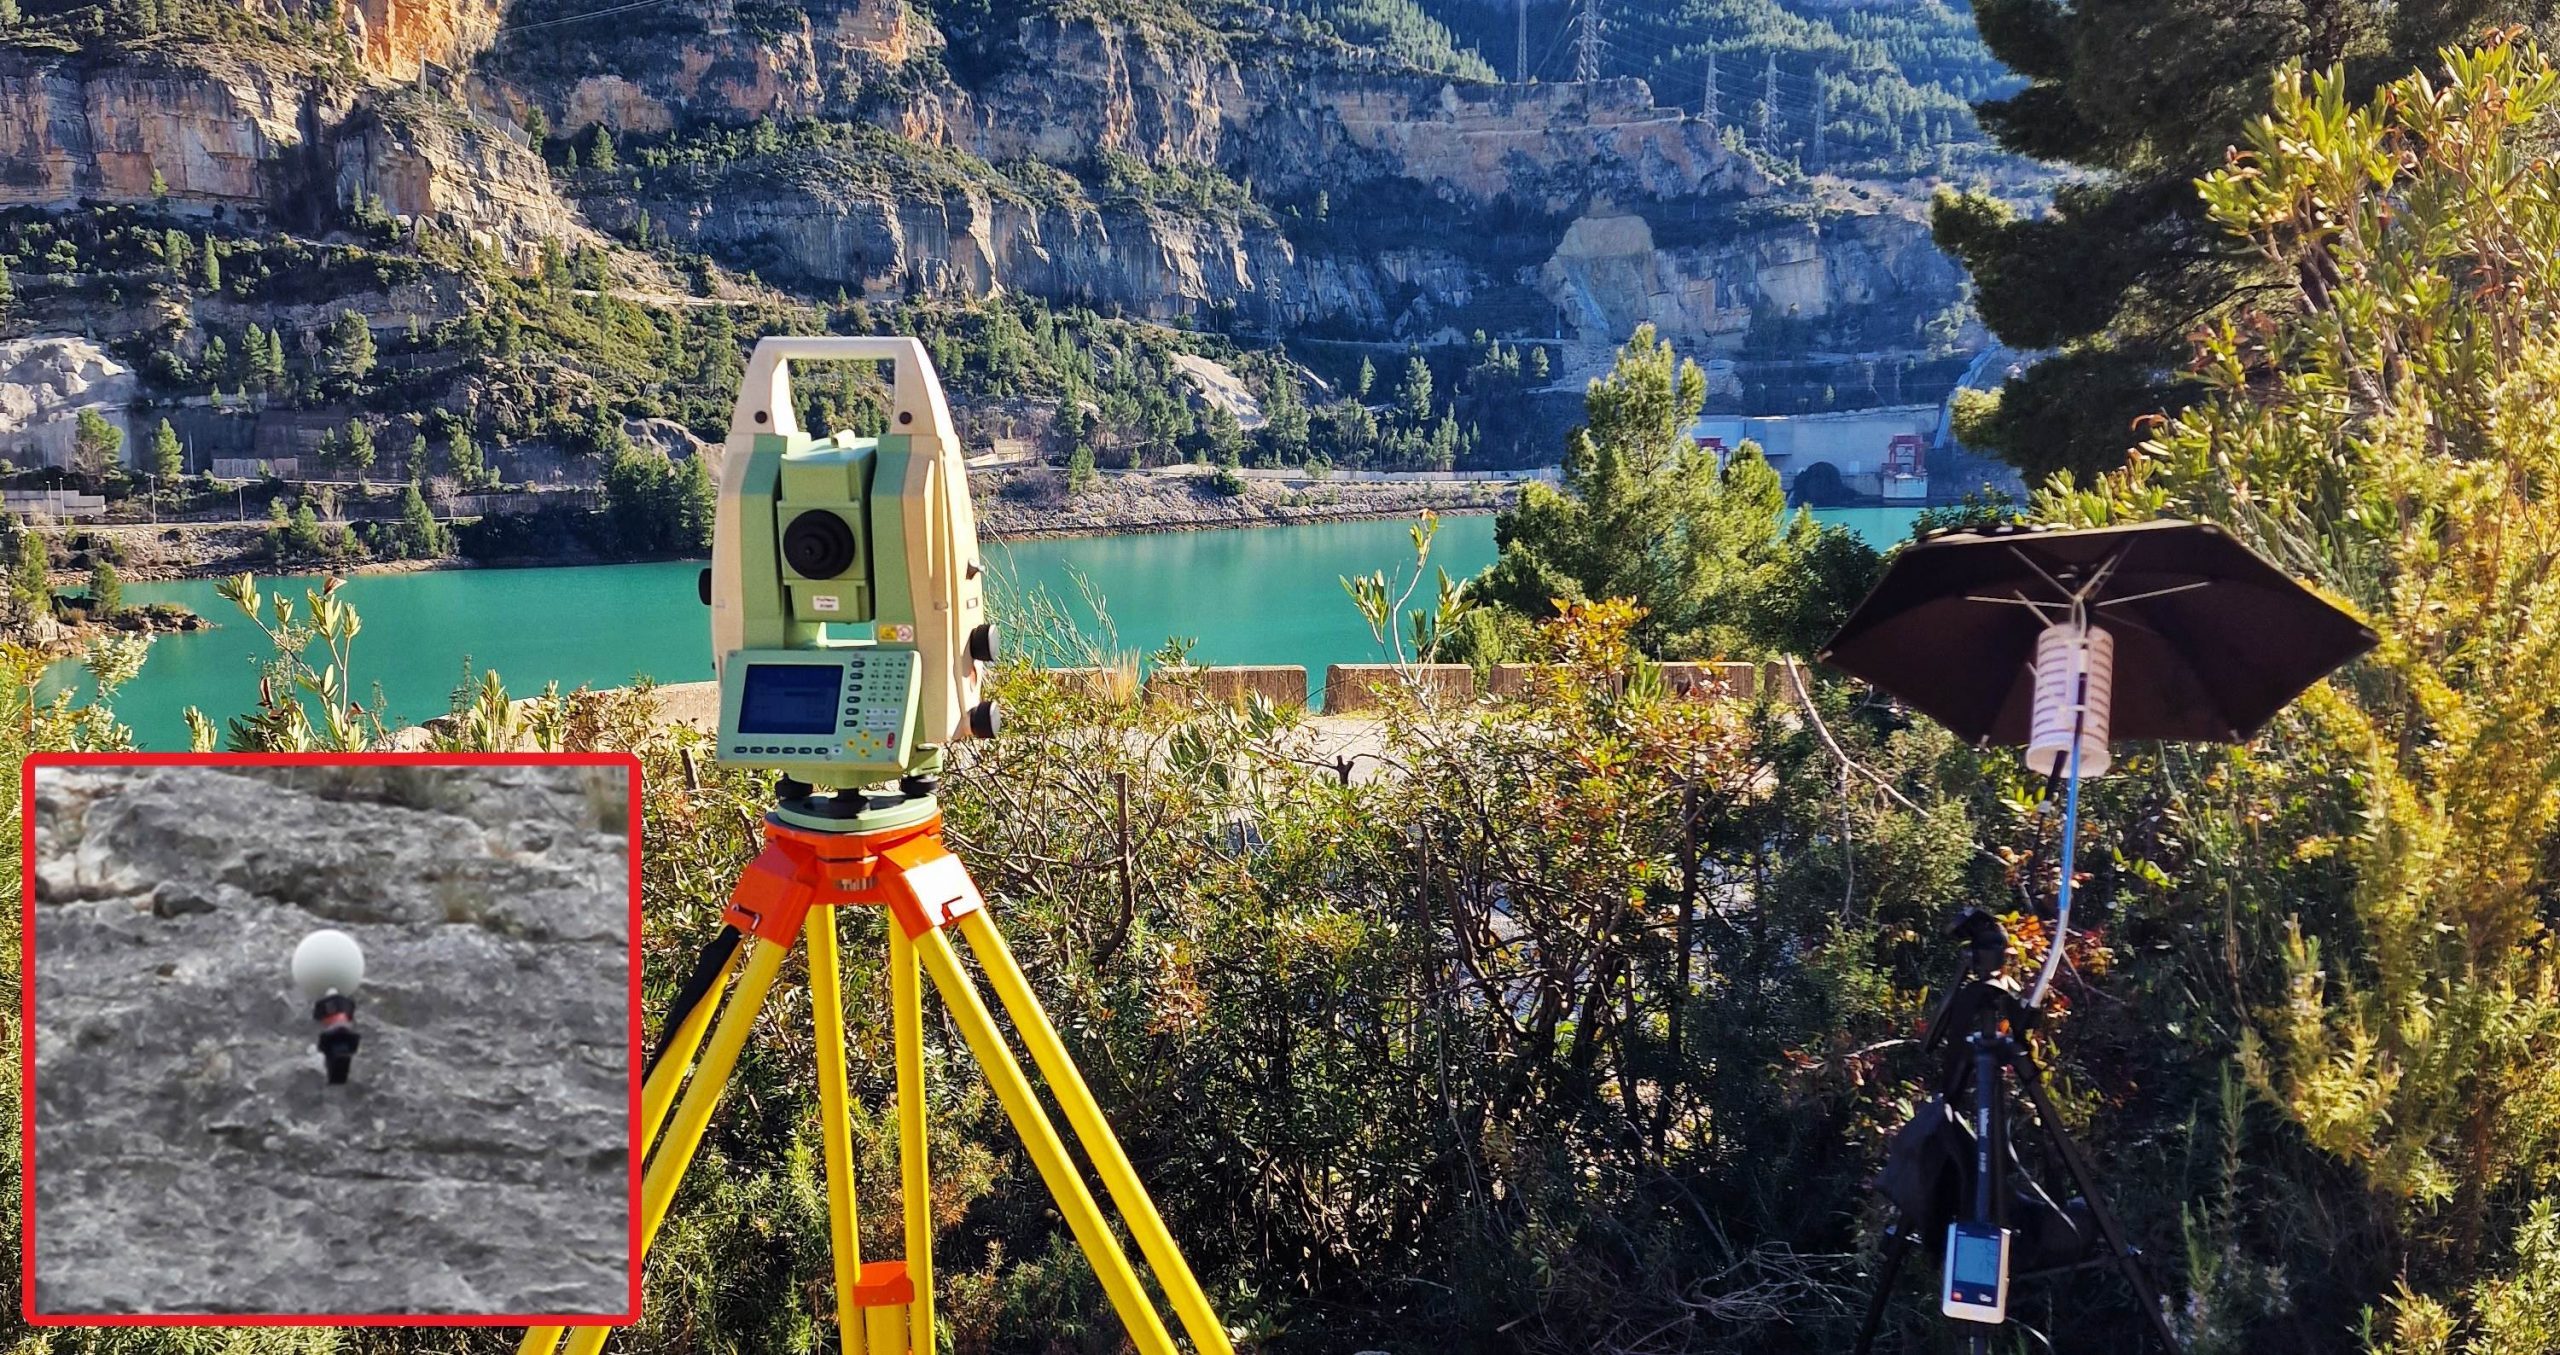 Cortes de Pallas Geodetic Network Deformation & Displacement Monitoring Geodesy & Panorama Photogrammetry Automatic Leica Total Station Over Long Distance